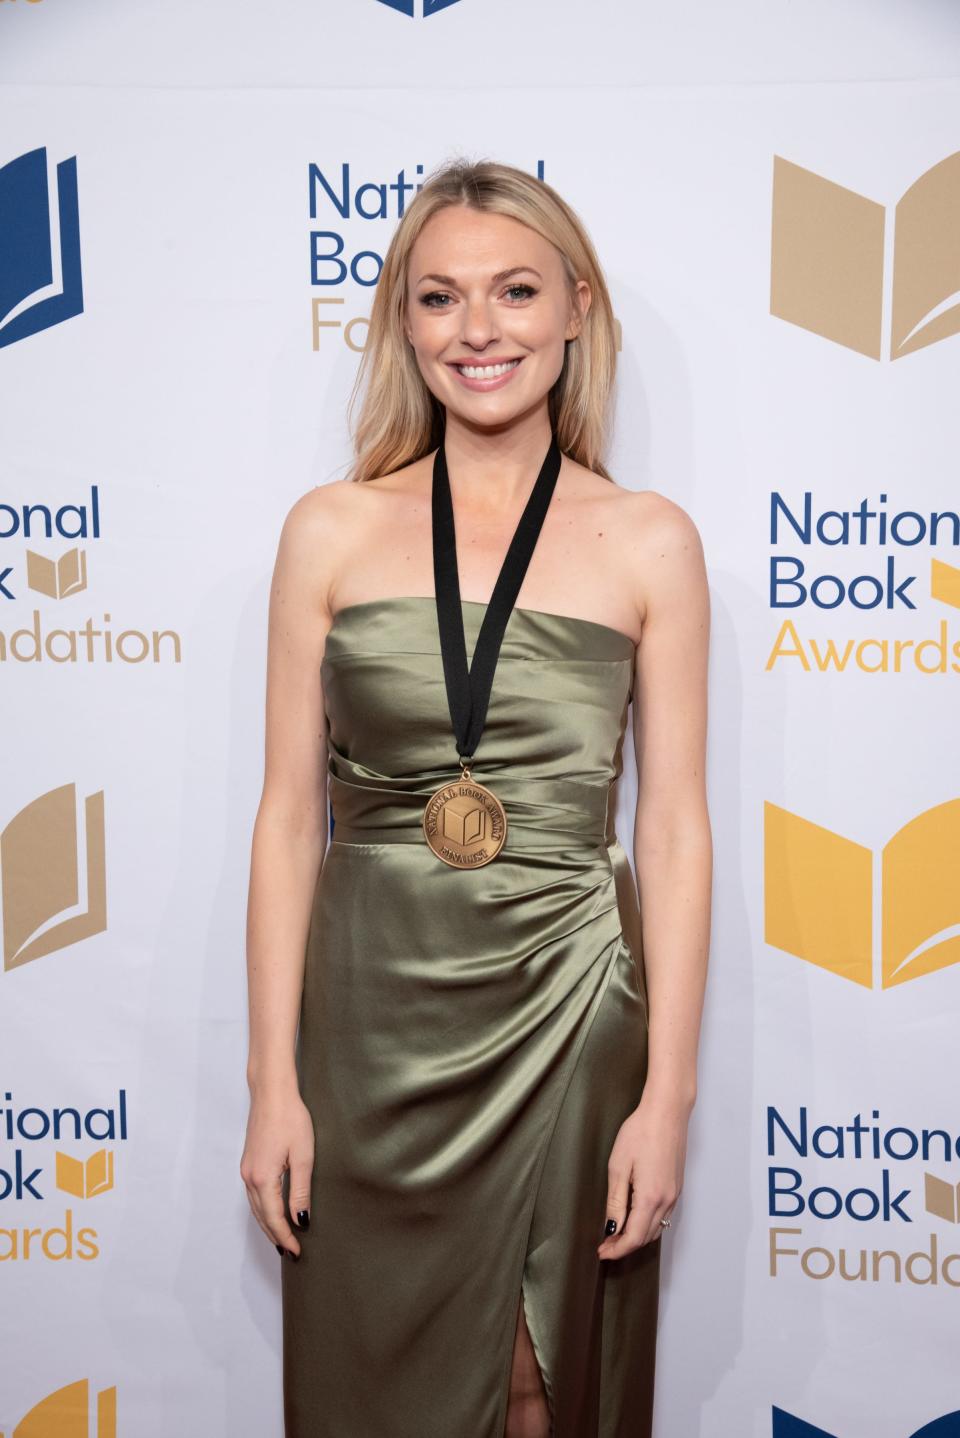 South Bend native Tess Gunty wears the medal she received for winning the National Book Award for fiction for her debut novel, "The Rabbit Hutch," at the 73rd National Book Awards Dinner and Ceremony on Nov. 16, 2022, at Cipriani Wall Street in New York City.